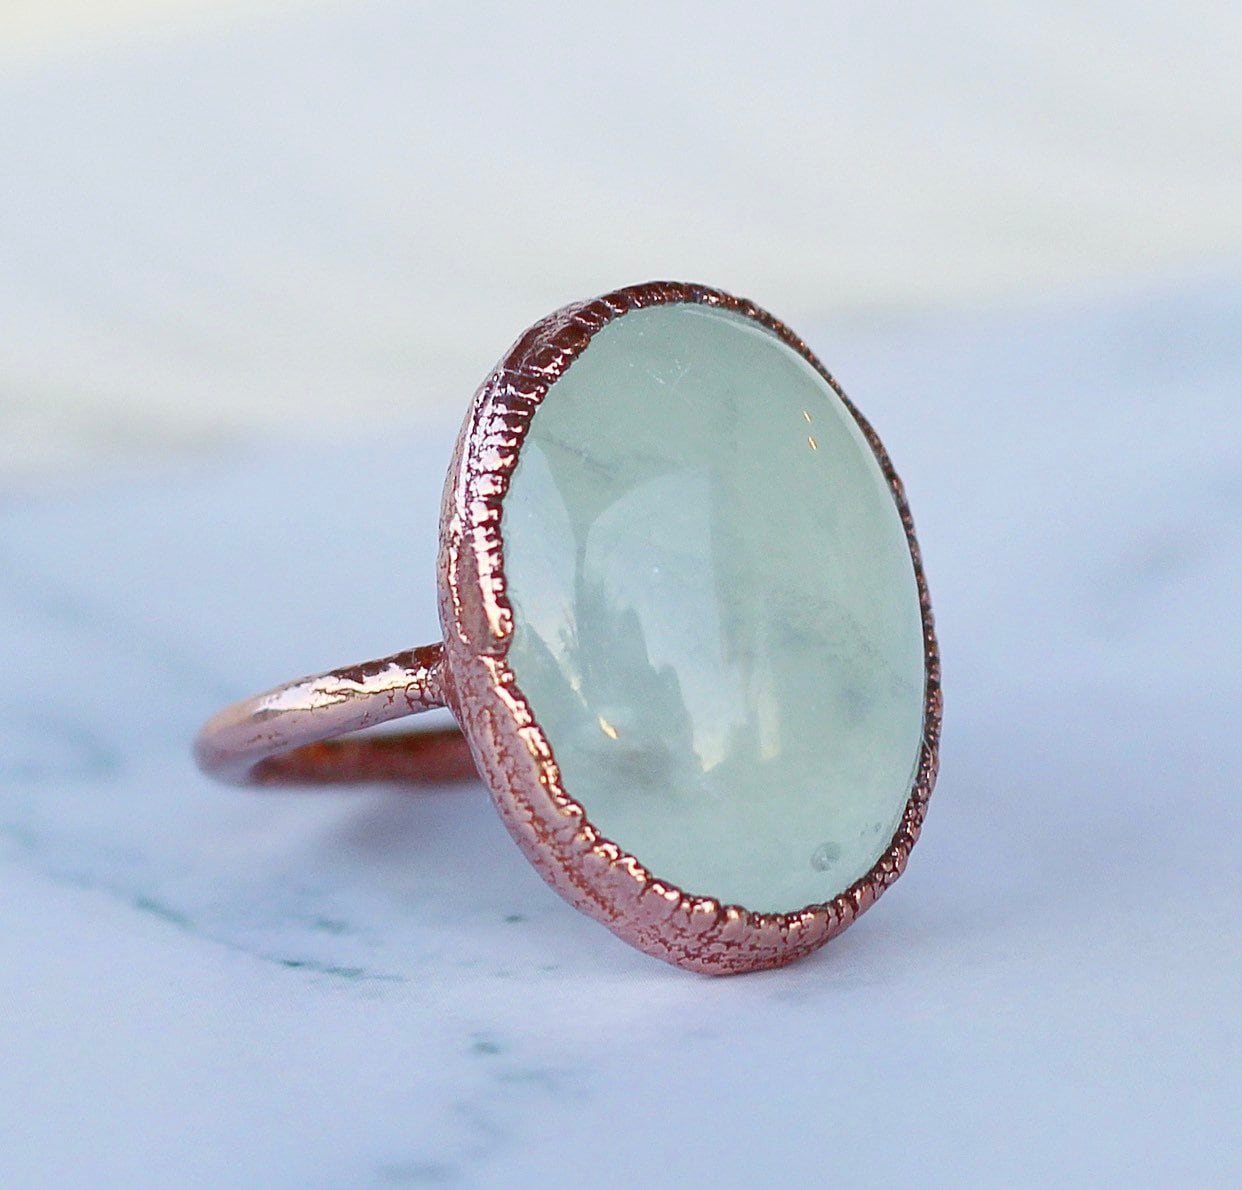 Caribbean Calcite Oval Ring, Raw Calcite Crystal Ring, Healing Calcite Jewelry, Blue Calcite Copper Ring, Aqua Stone Oval Ring